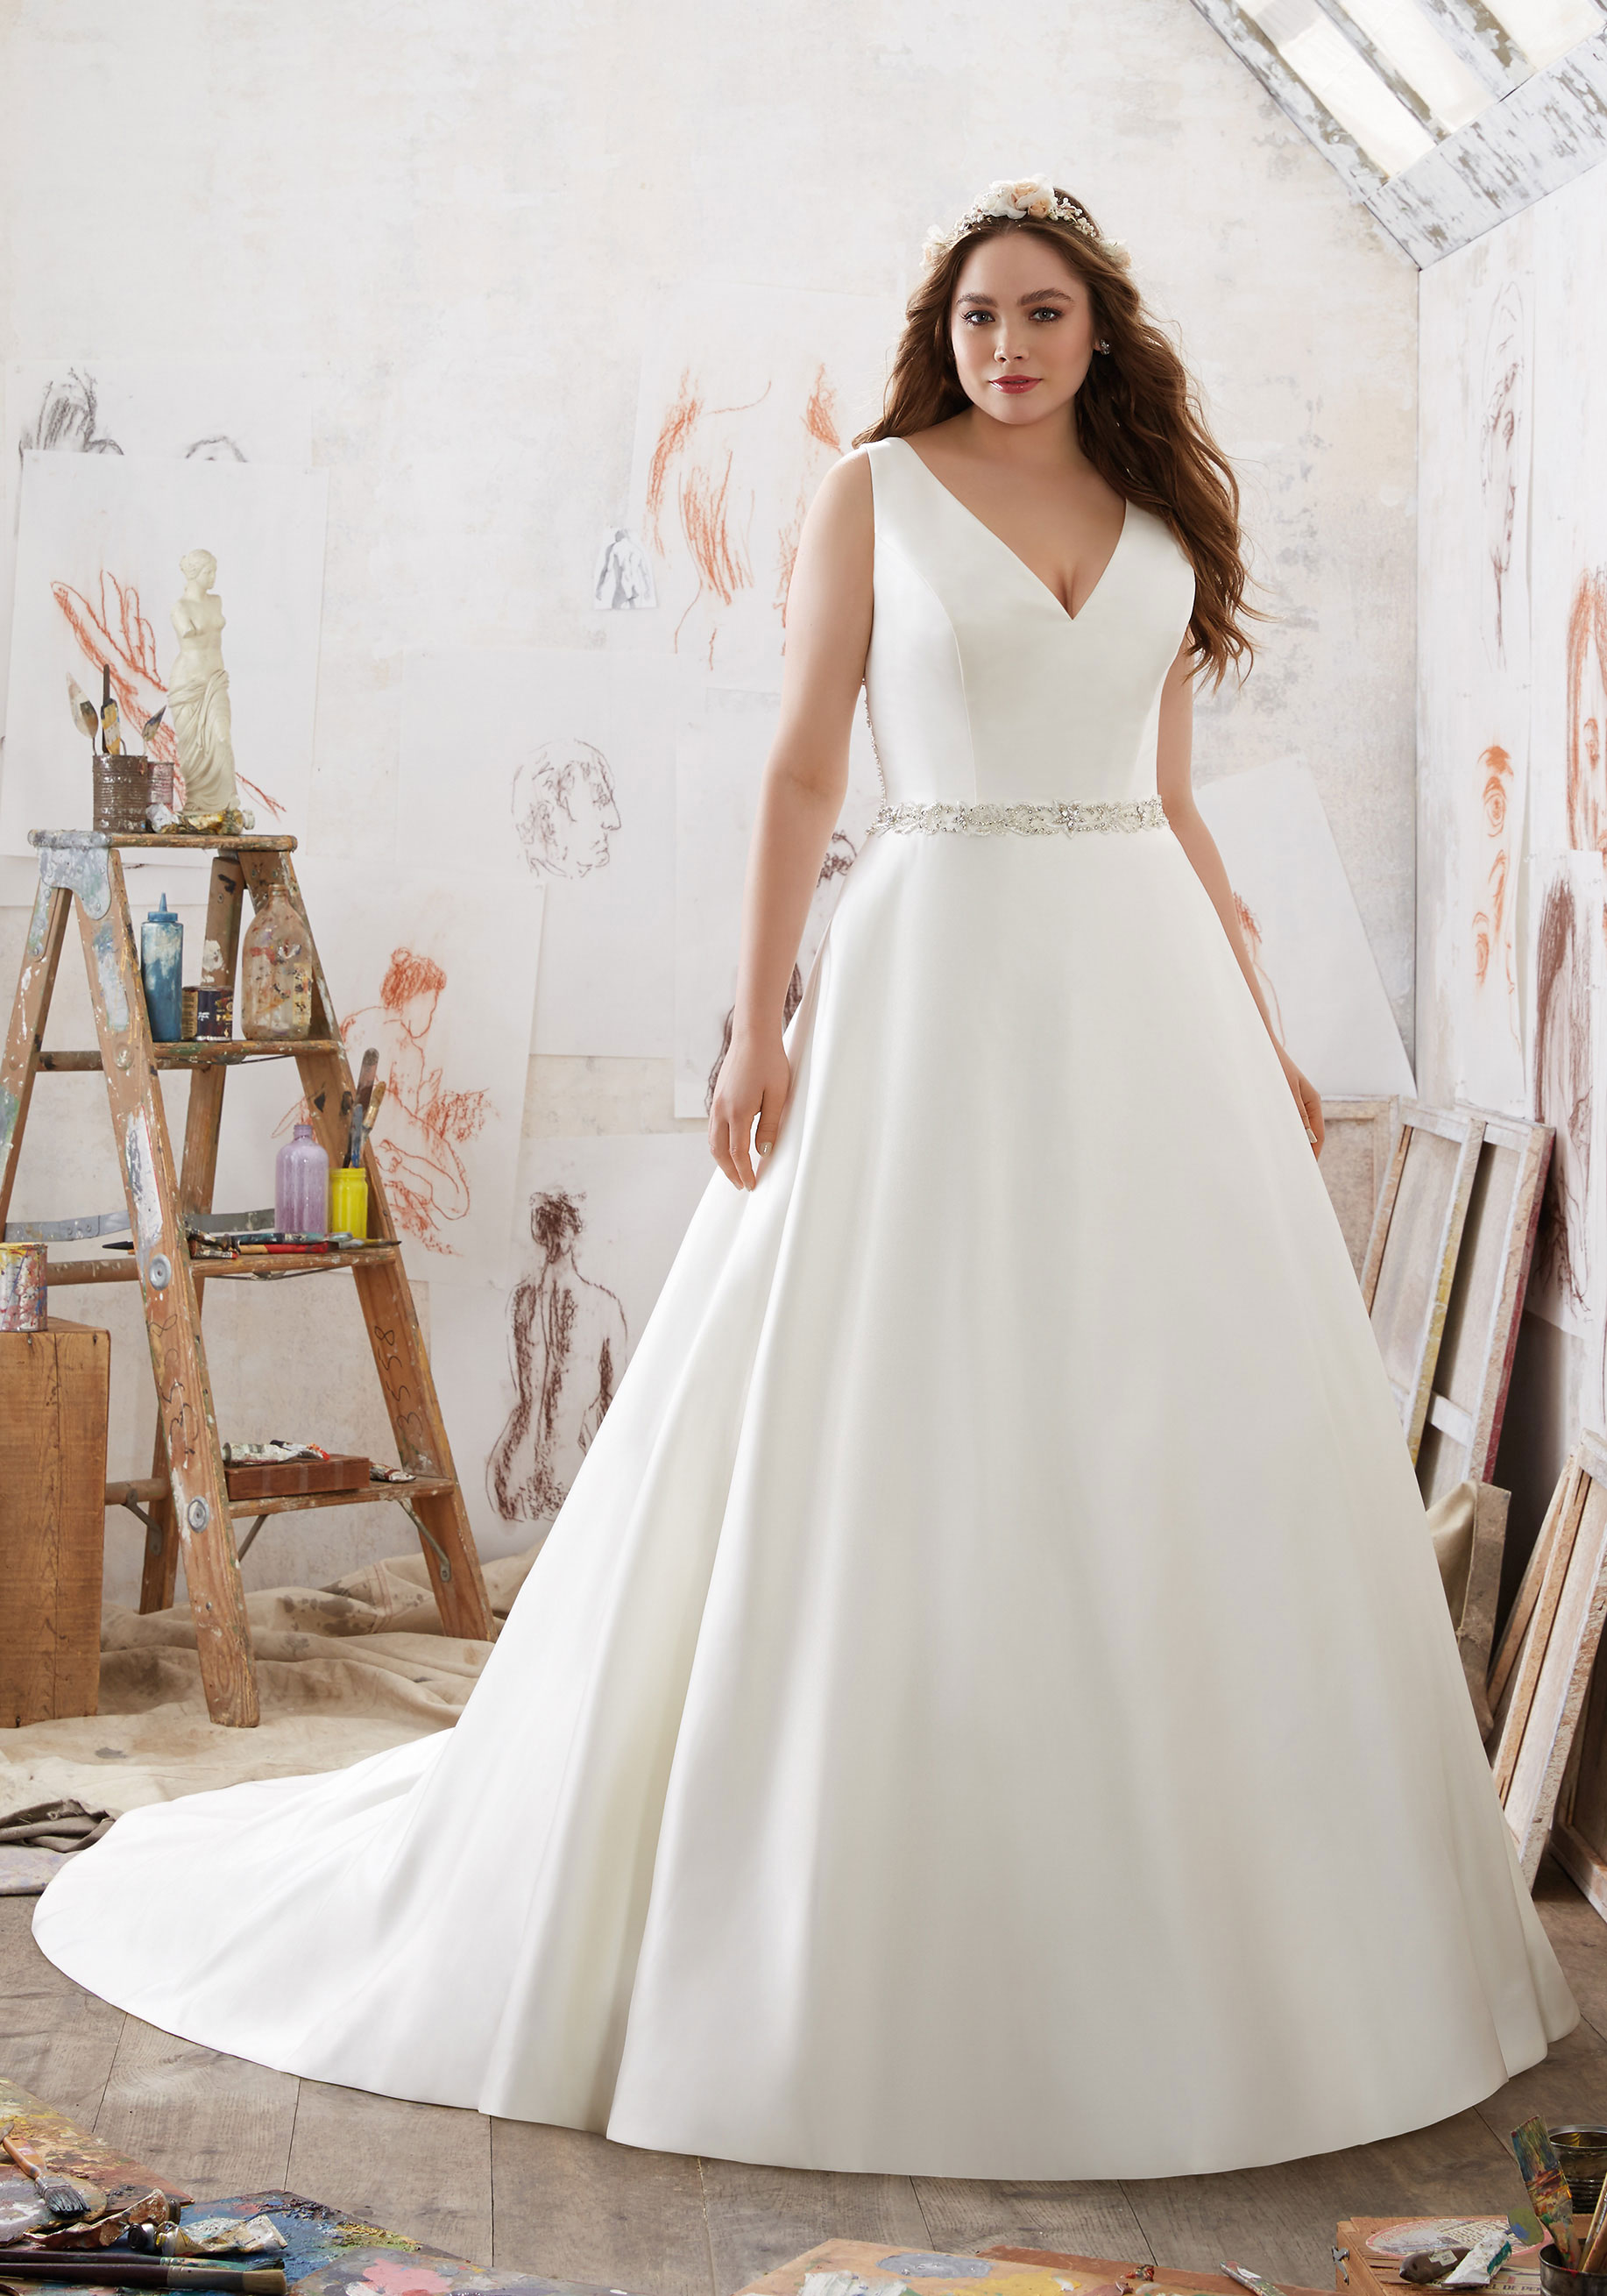 22. Plus Size Wedding Dresses With Sleeves 